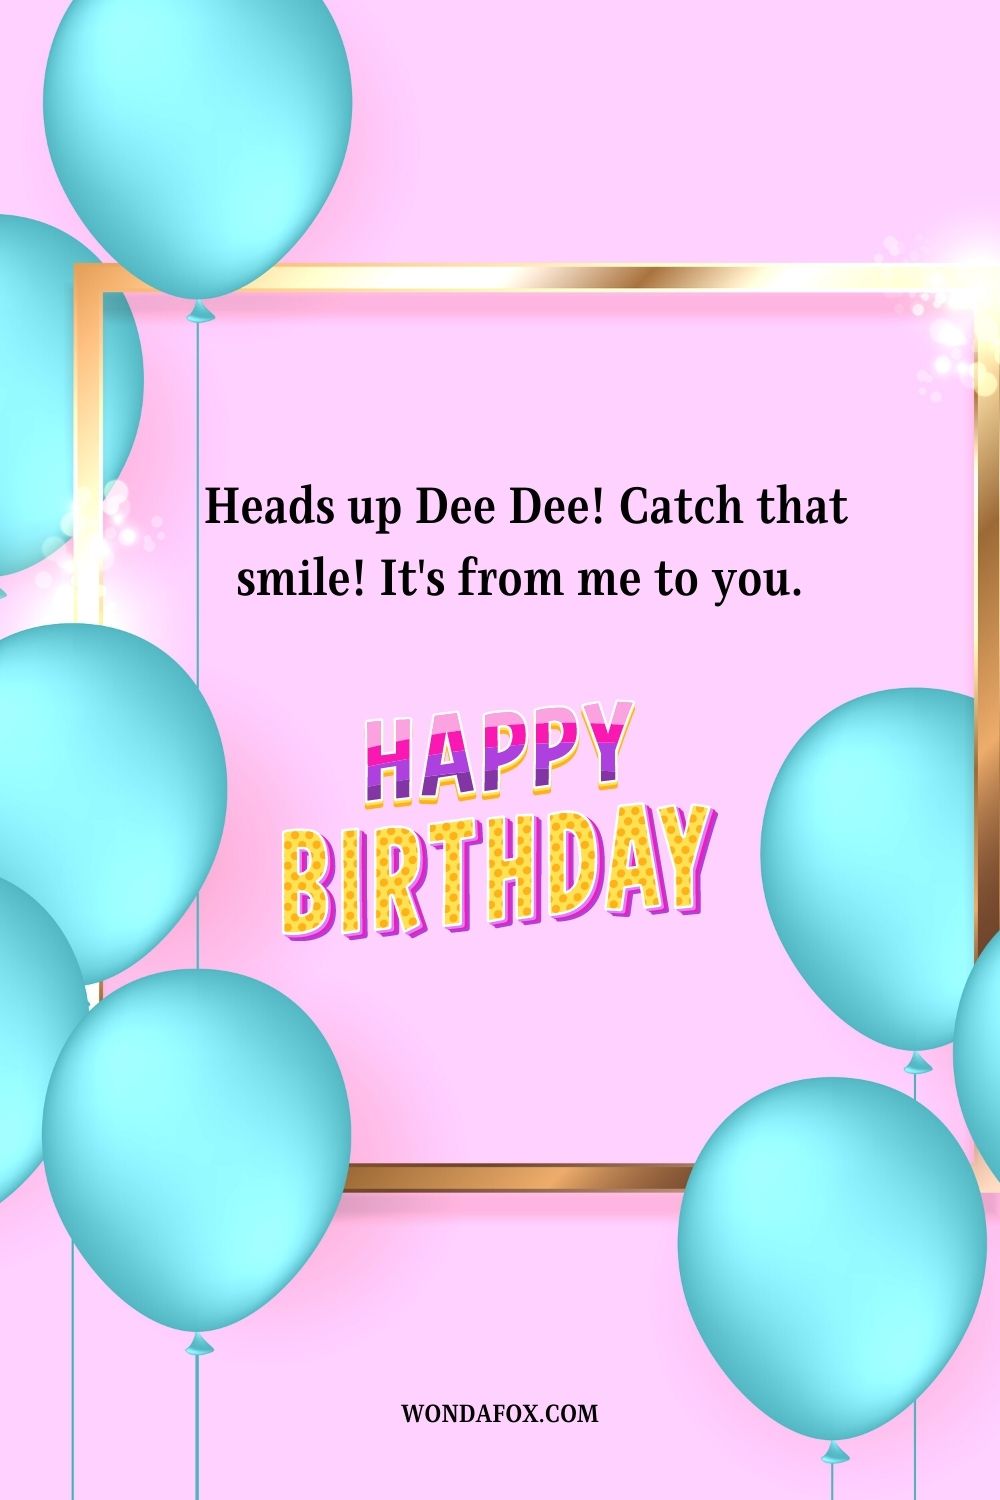 Heads up Dee Dee! Catch that smile! It's from me to you. Happy birthday.